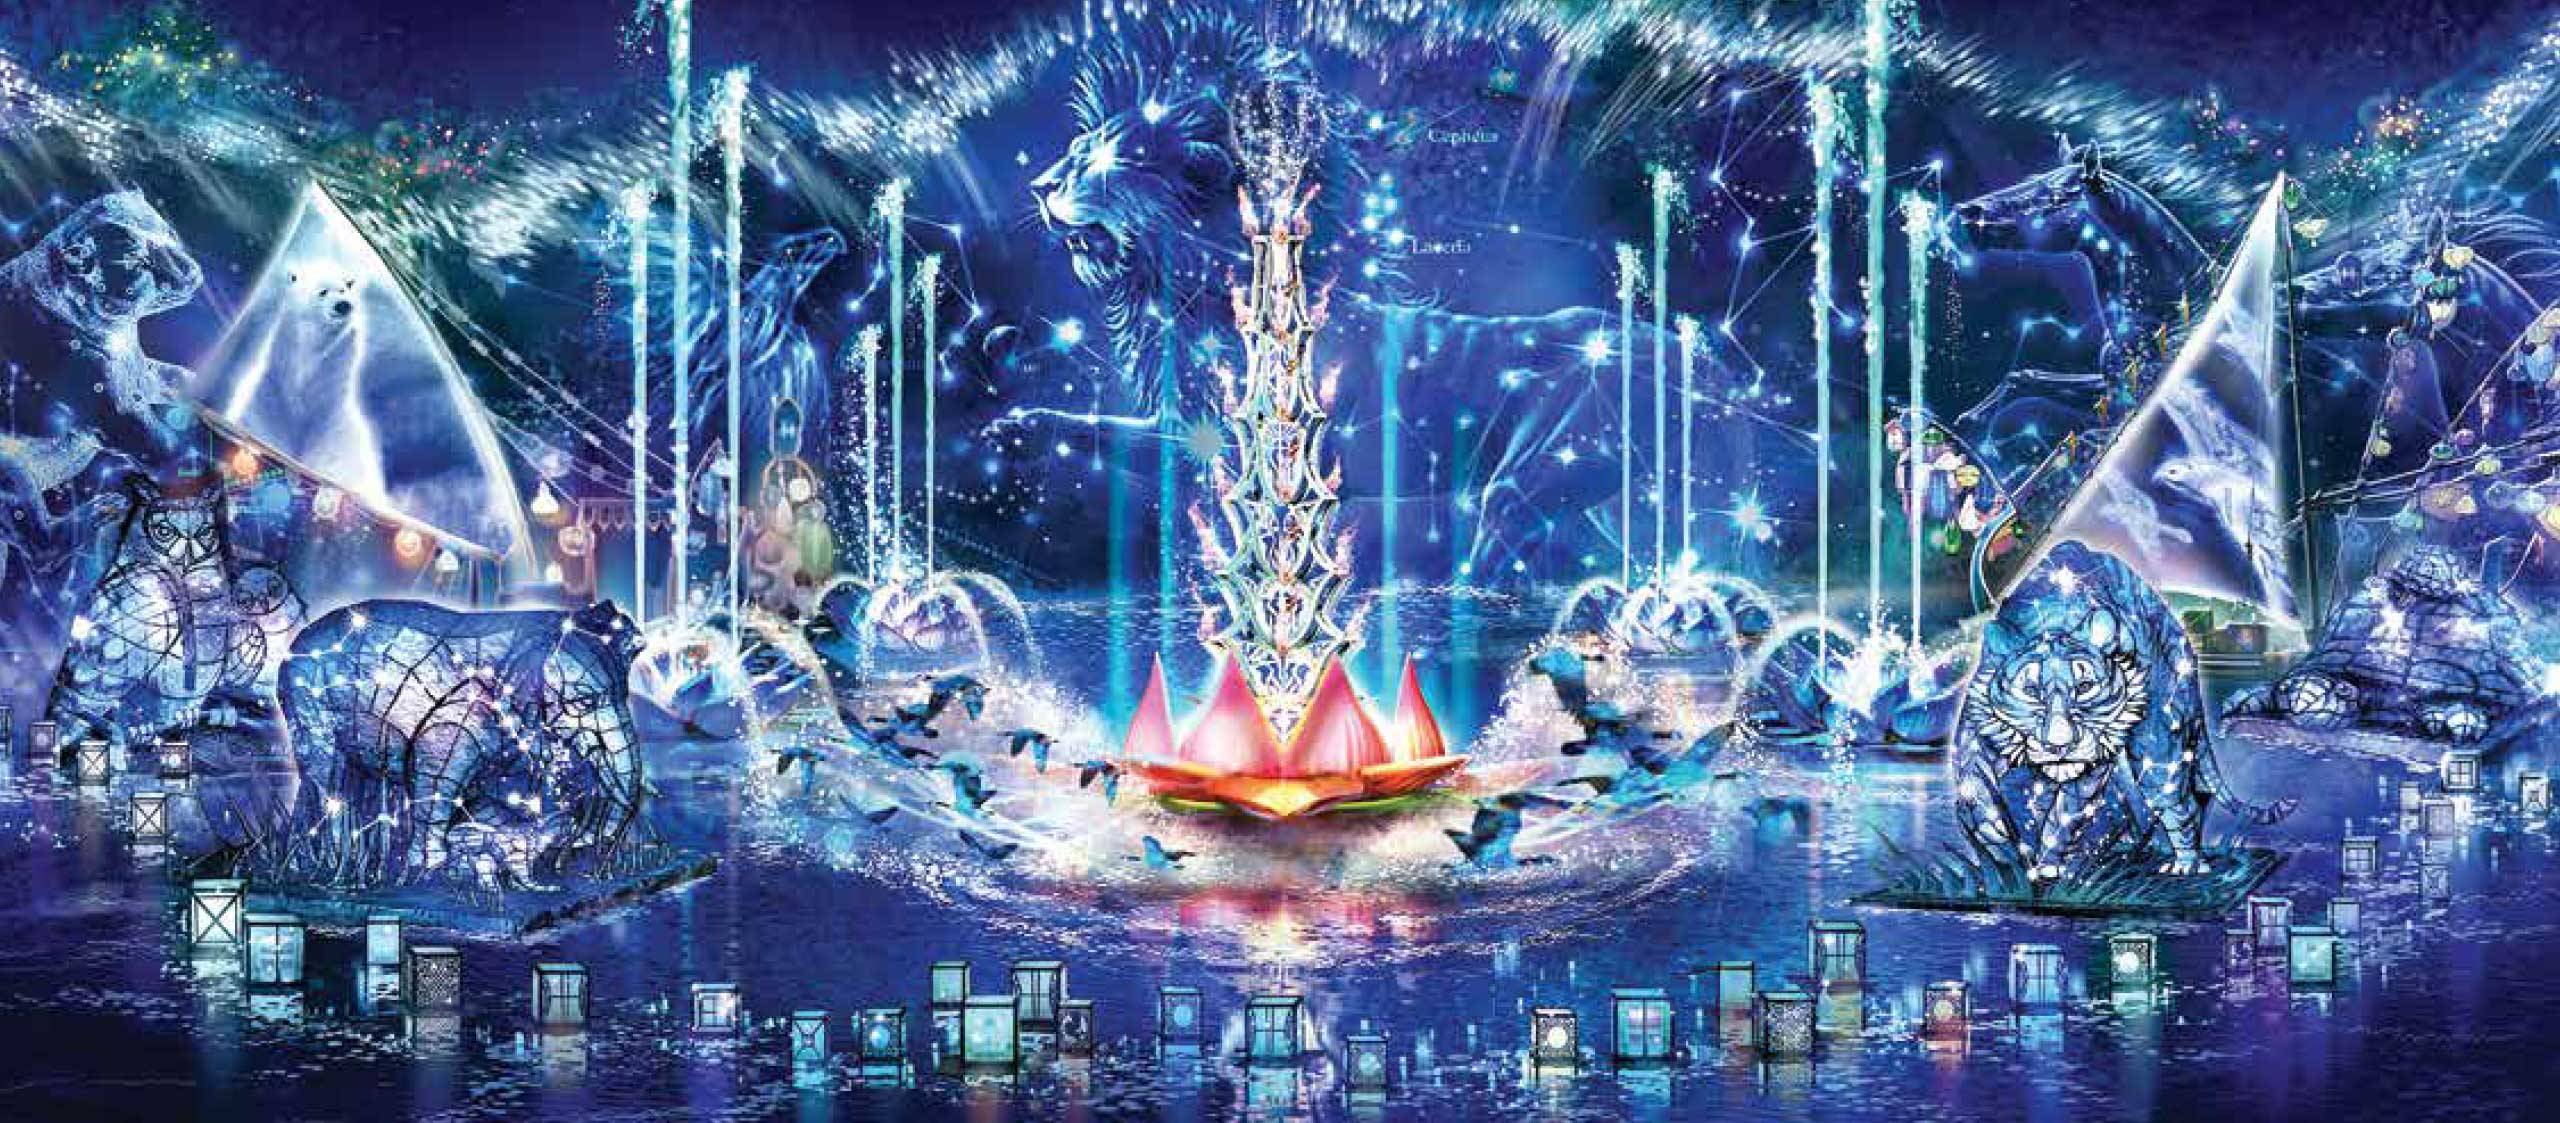 PHOTOS - Concept art revealed for Disney's Animal Kingdom's new nighttime show - 'Rivers of Light'